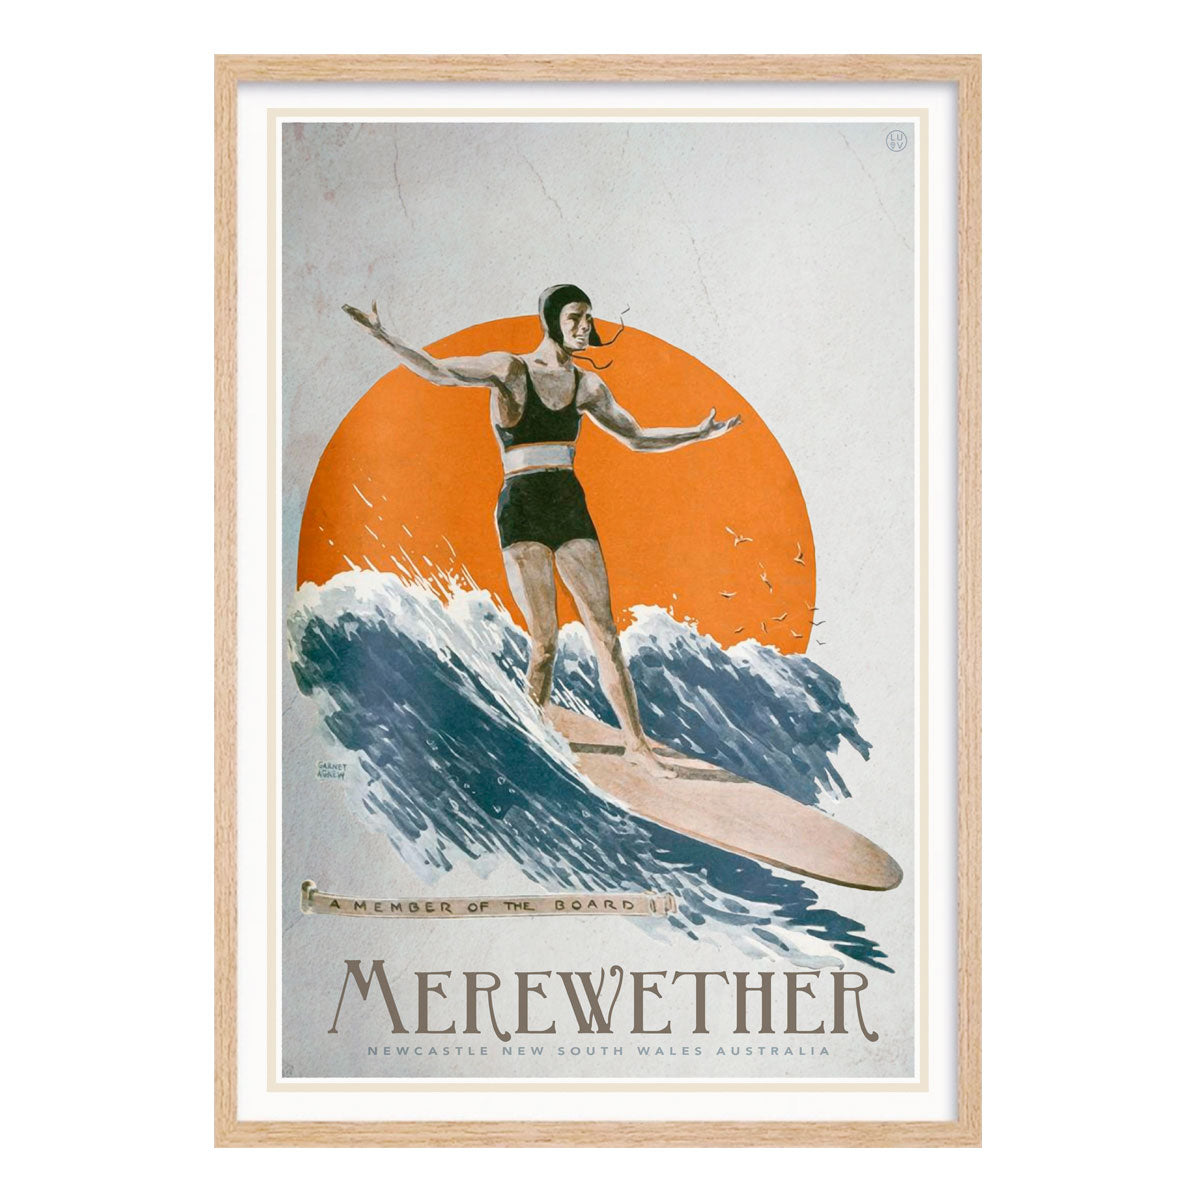 Merewether retro vintage surfer poster print in oak frame from Places We Luv